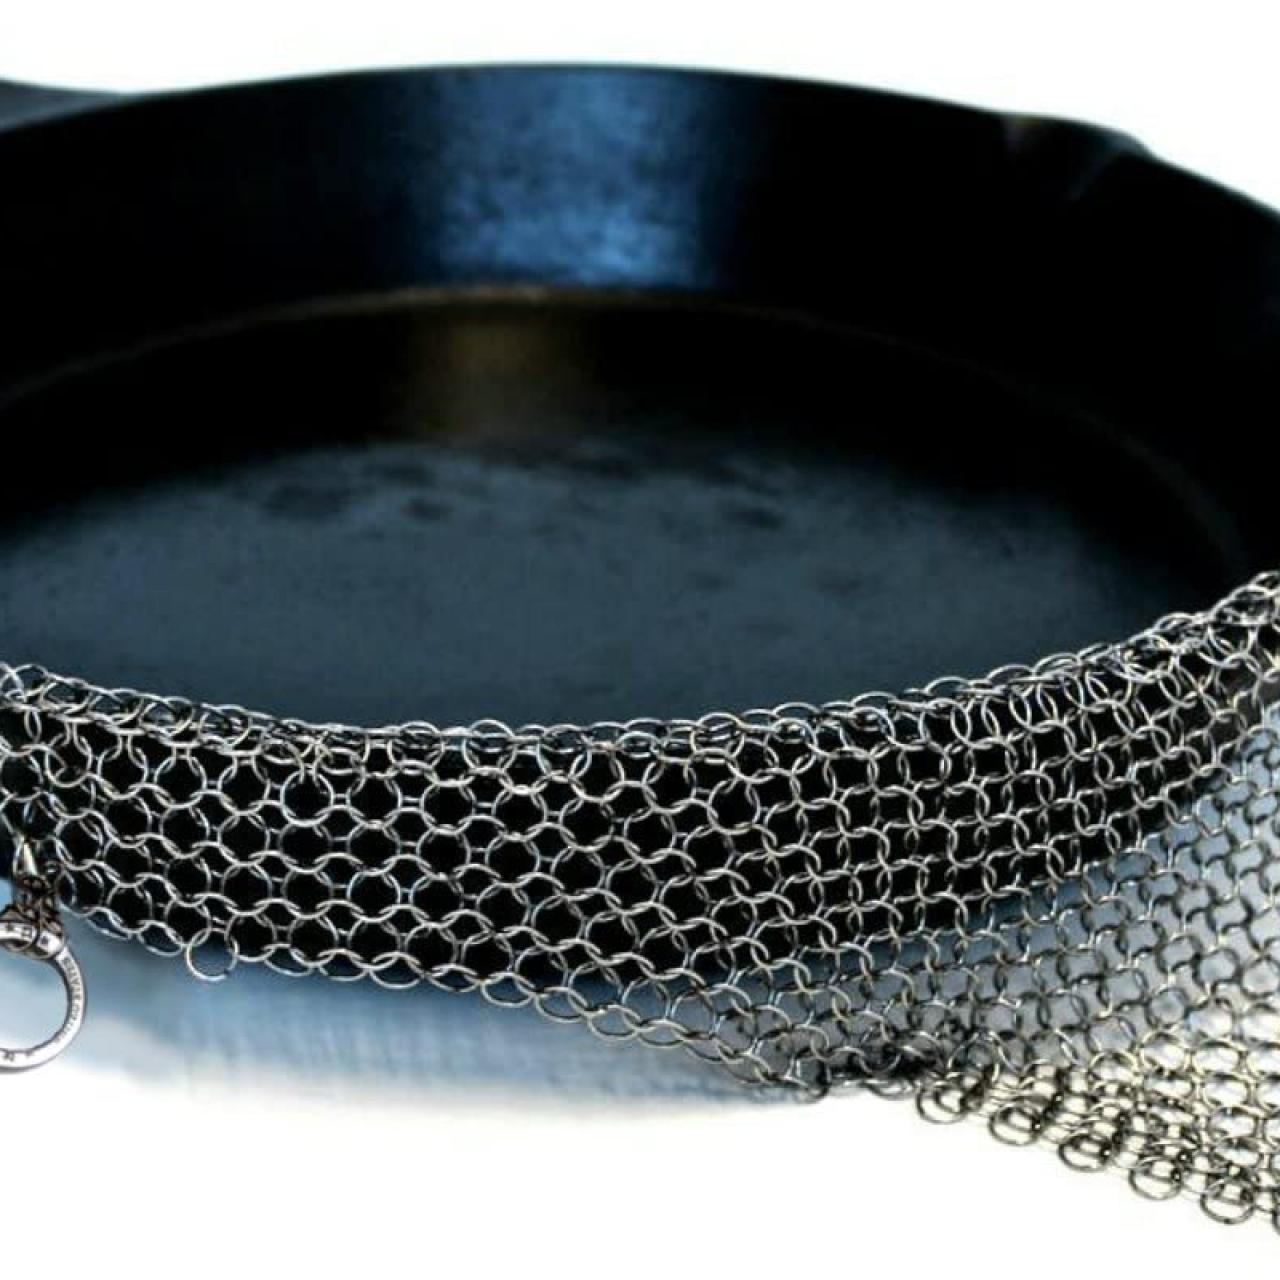 https://food.fnr.sndimg.com/content/dam/images/food/products/2021/3/8/rx_the-ringer---the-original-stainless-steel-cast-iron-cleaner.jpeg.rend.hgtvcom.1280.1280.suffix/1615217116020.jpeg